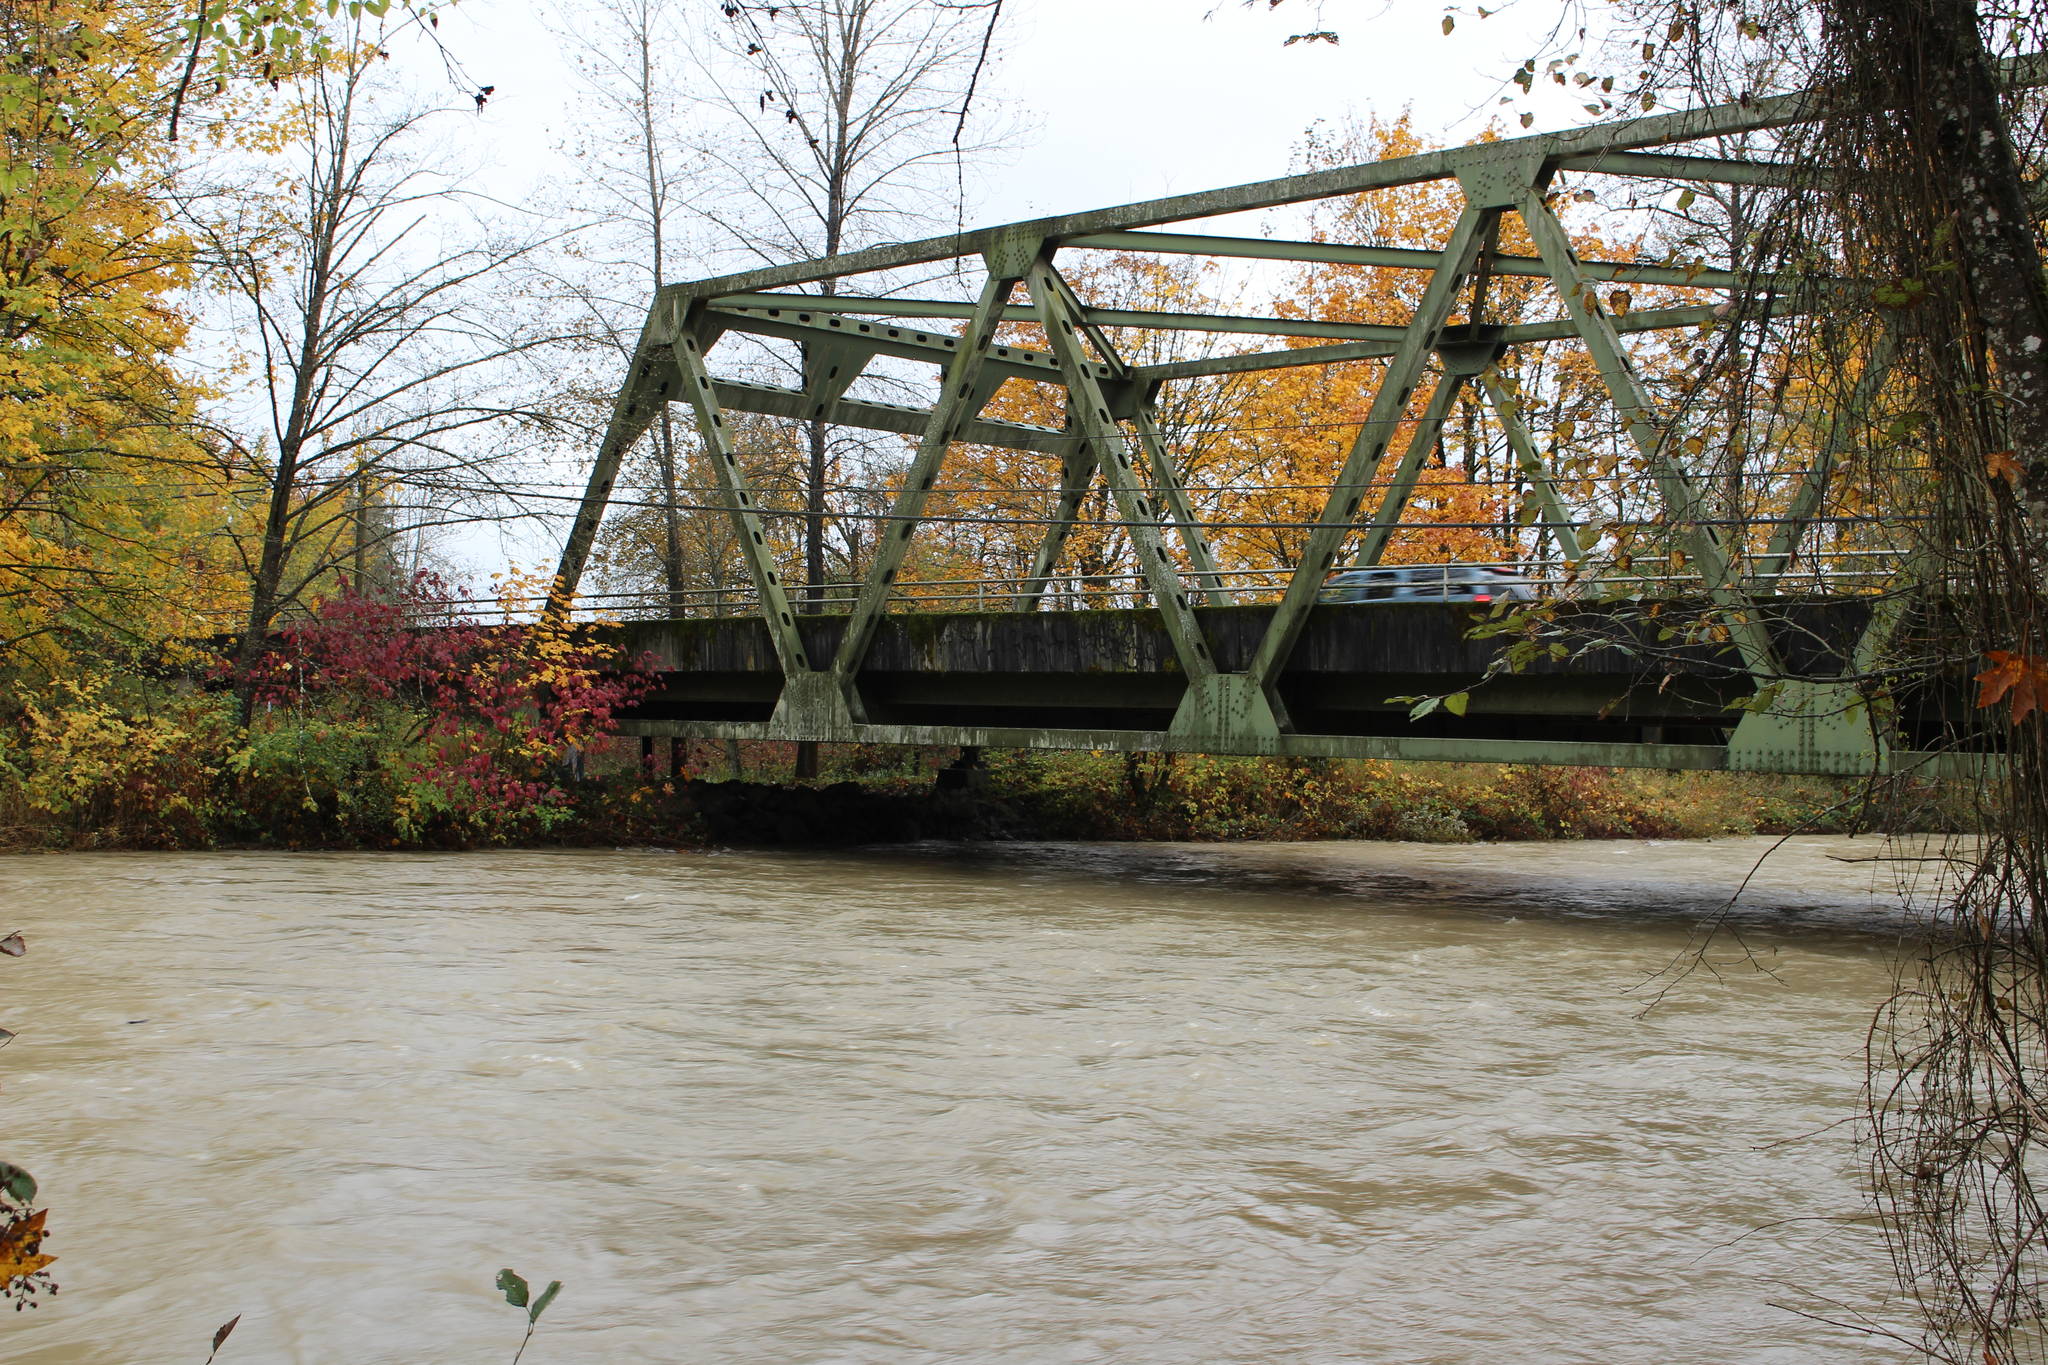 The Tolt River was pushing against its banks near Carnation on Oct. 22. Heavy rains filled the river, leading to road closures. Aaron Kunkler/staff photo